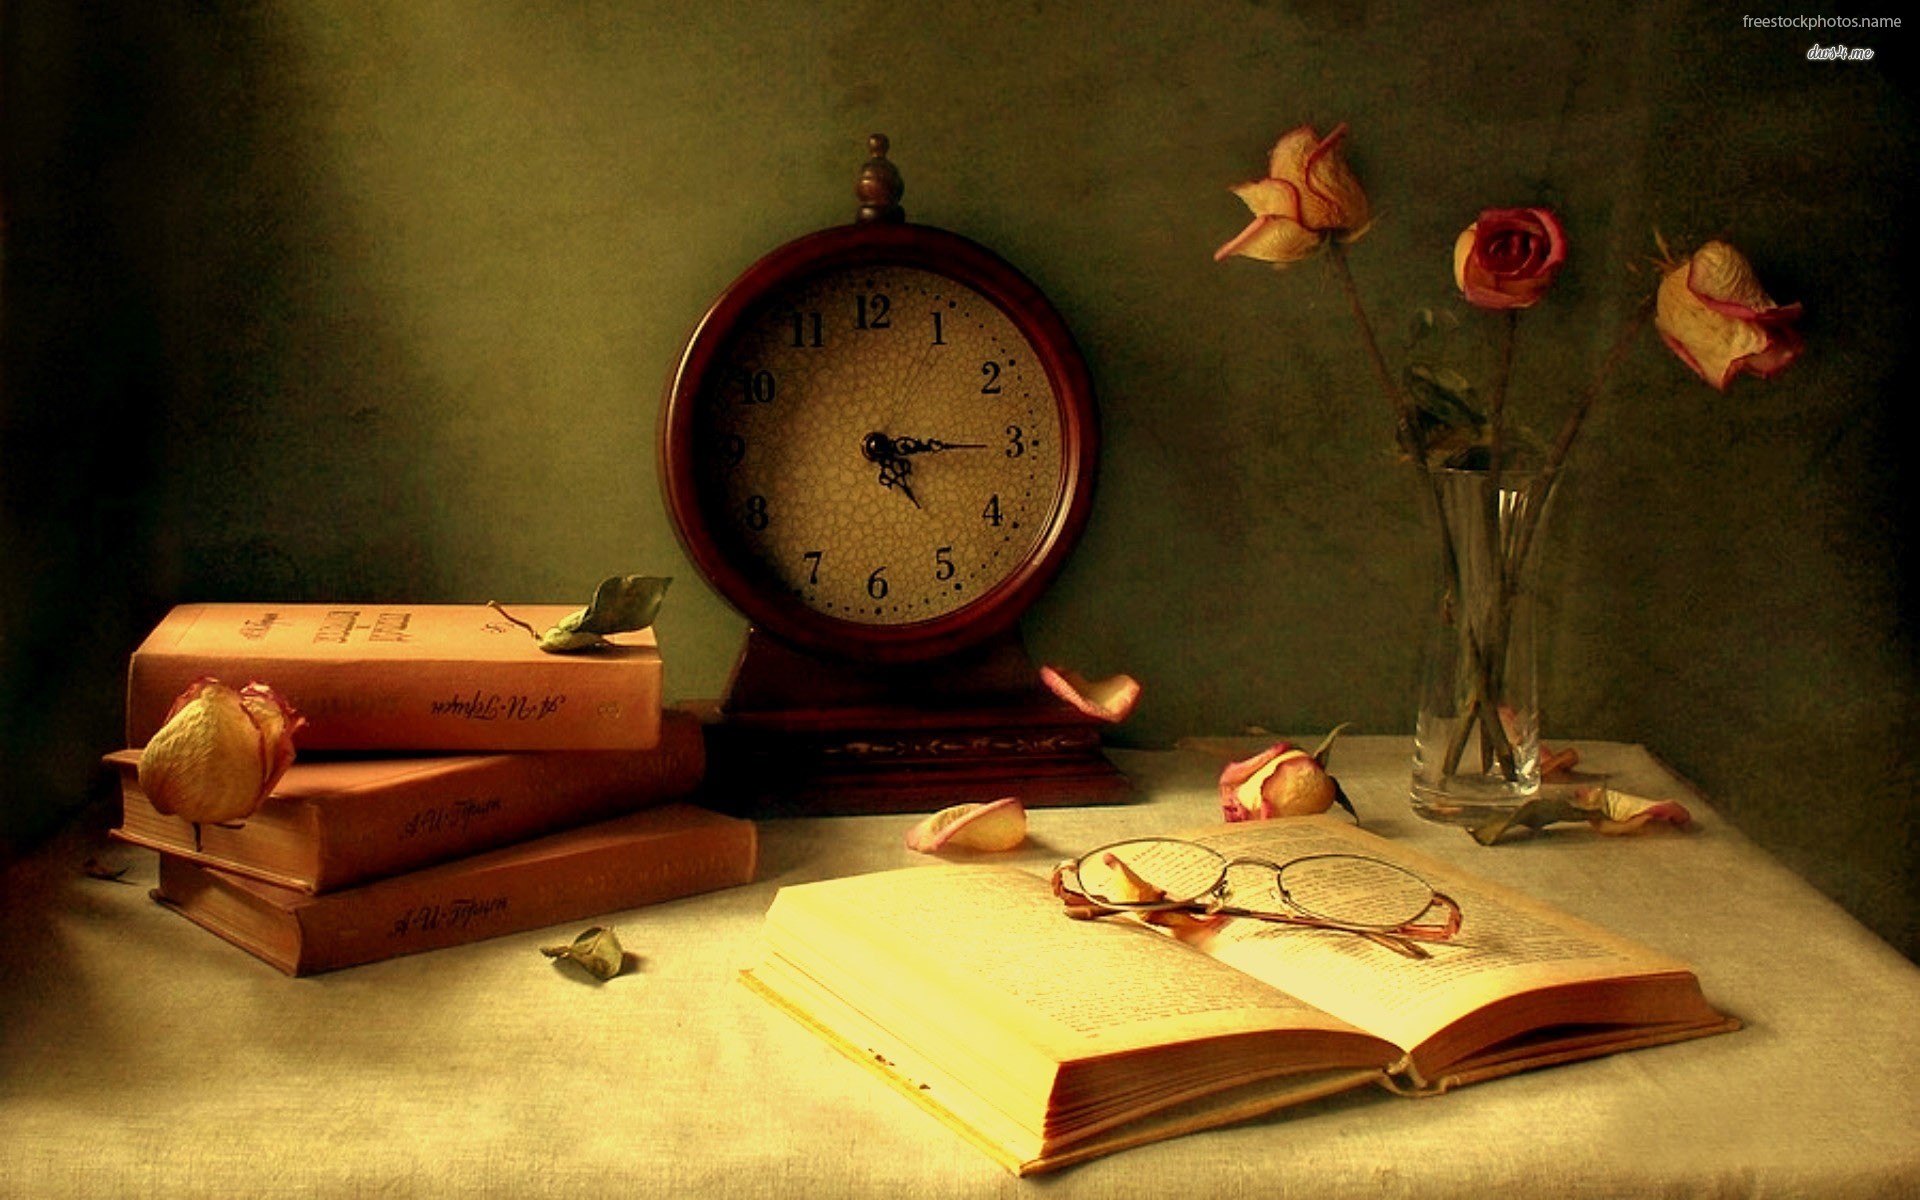 Download Books And A Old Watch On The Table Data Src Books Wallpaper HD